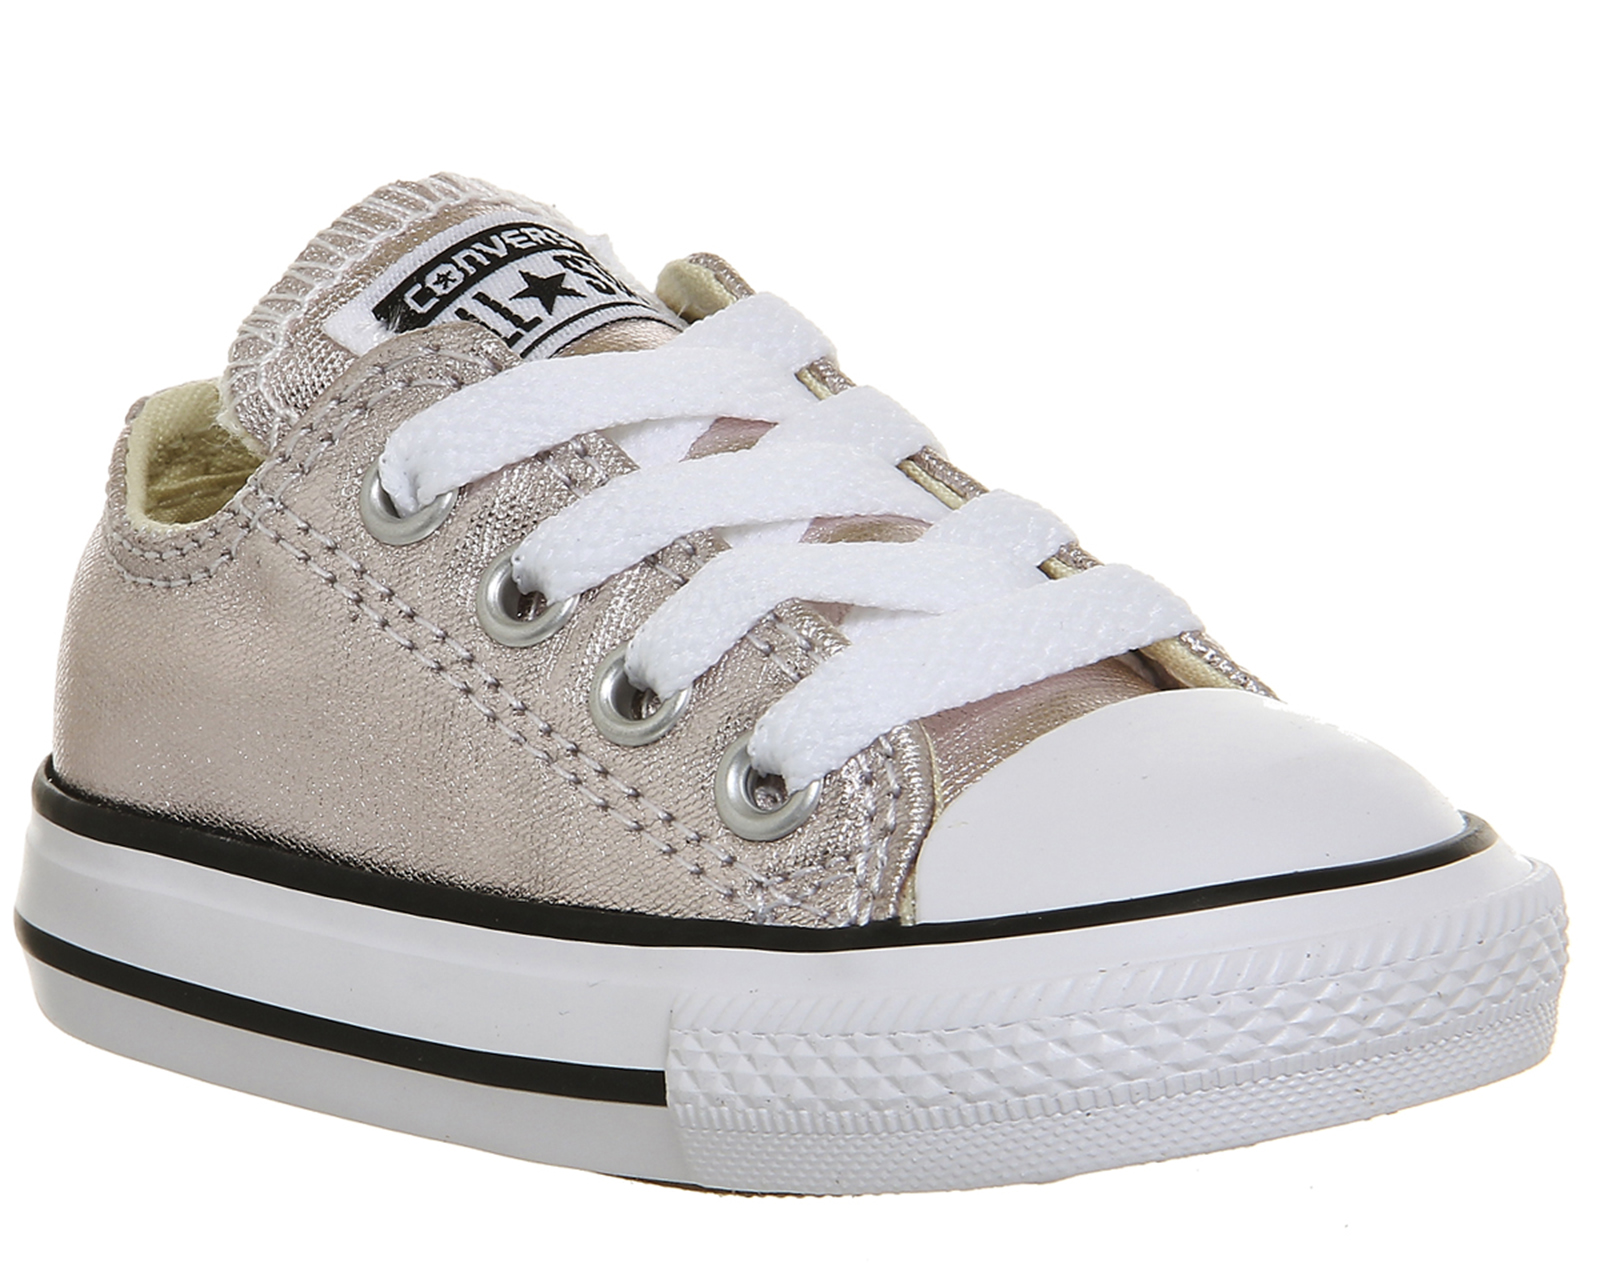 Converse All Star Low Infant Pink Metallic Synthetic - Unisex